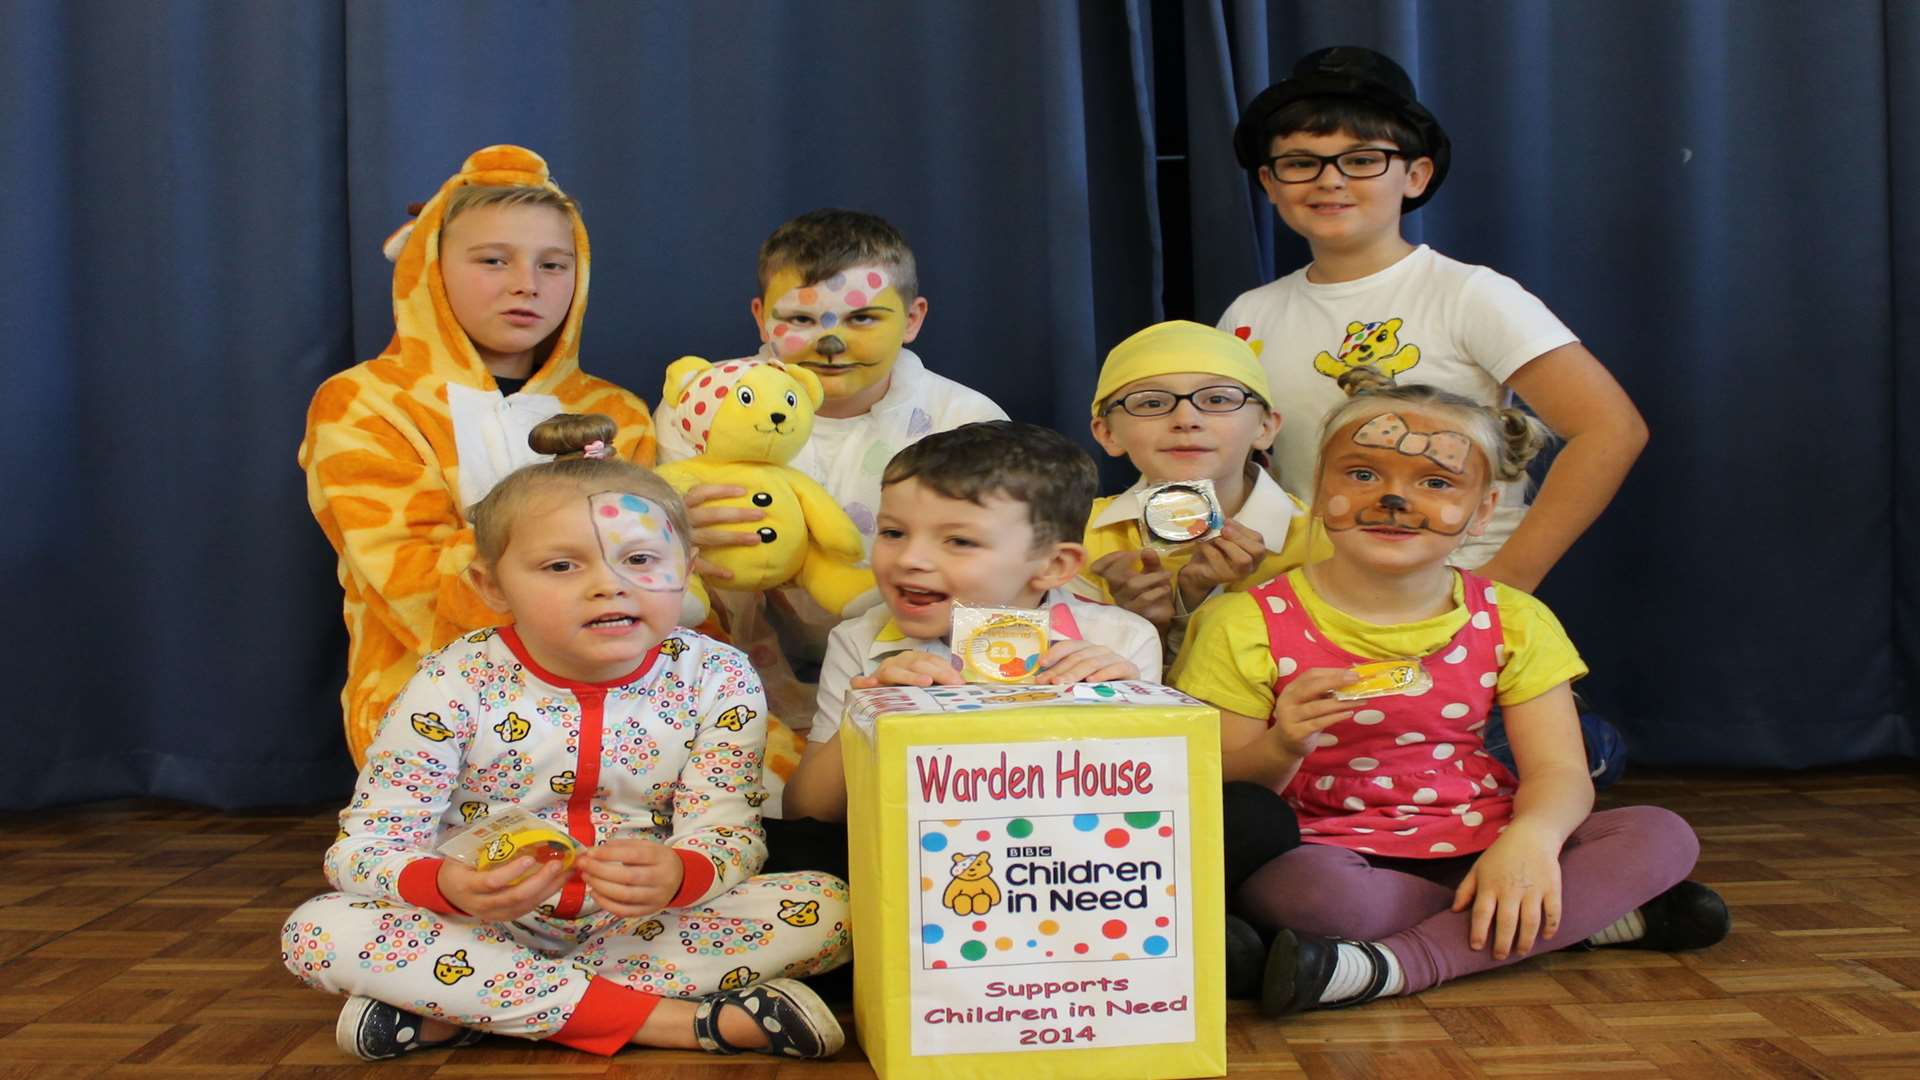 Winners of the fancy dress competition at Warden House Primary School; Lilly Coyston, Kallum Delsignore, Ellie-Mae Curry, Marshall Spelzini, Morgan Pearce and Joe Kent